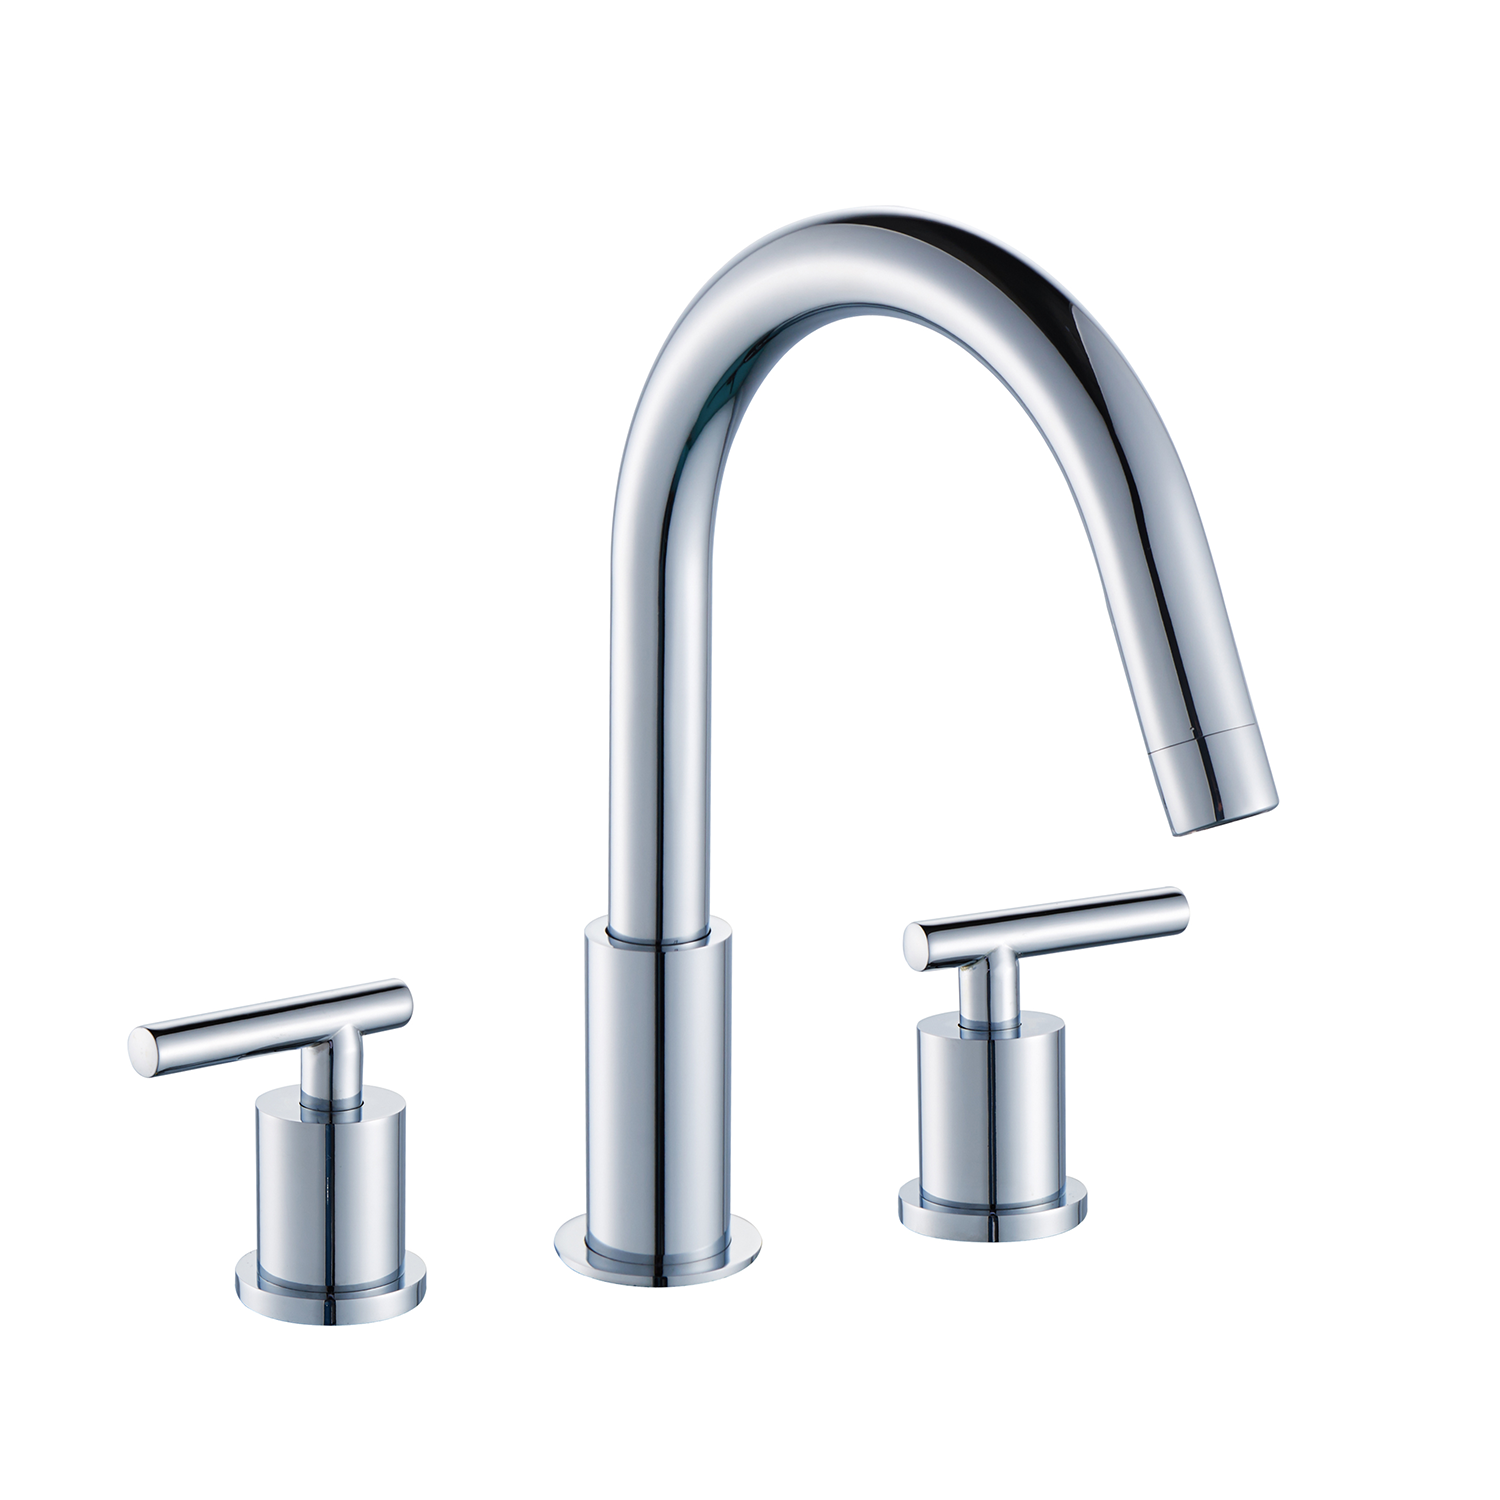 DAX Two Handle Bathroom Faucet Round Shape (DAX-8312)